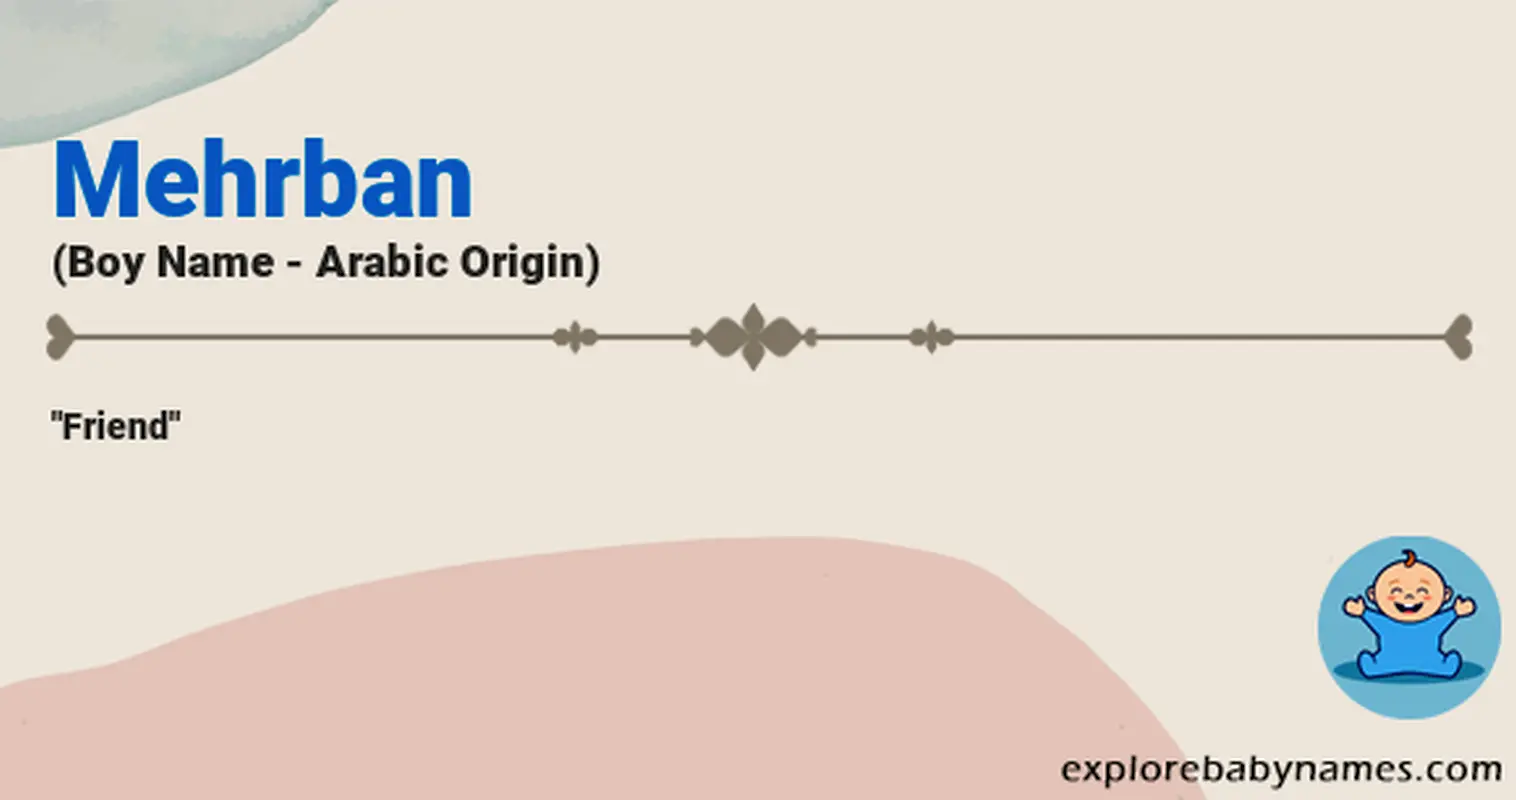 Meaning of Mehrban